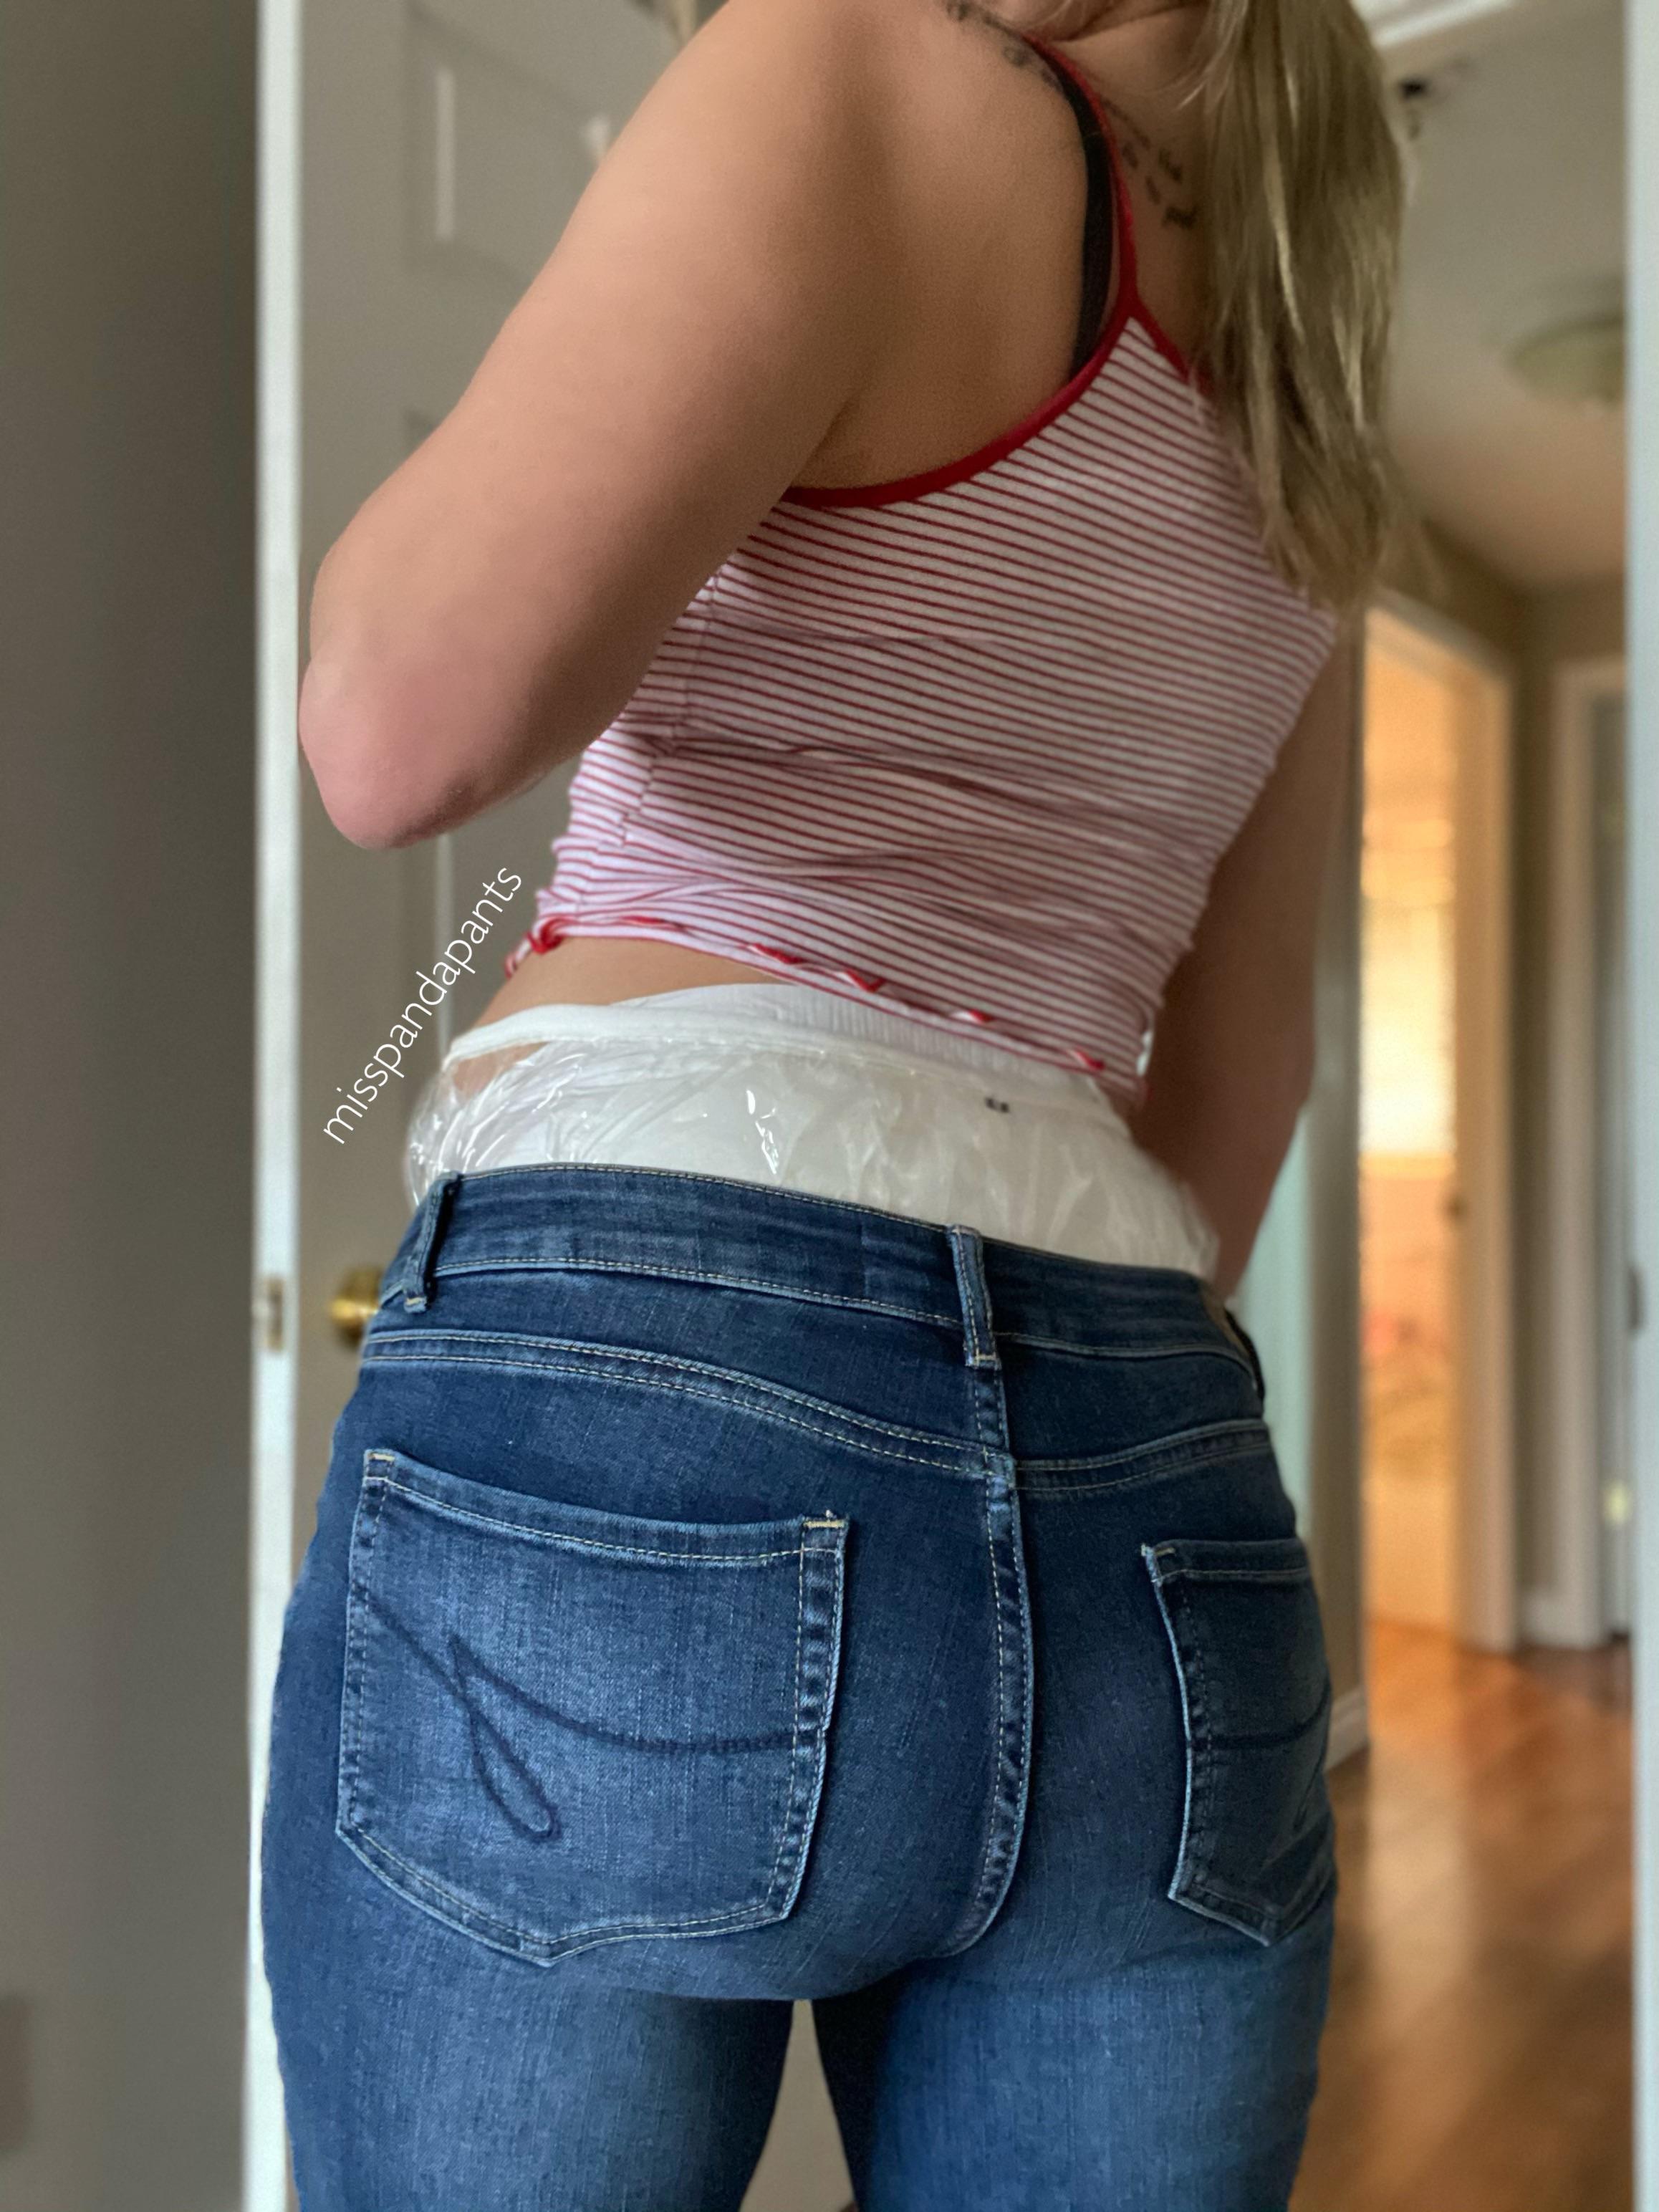 Diapers Under Jeans Is The Best Look Scrolller